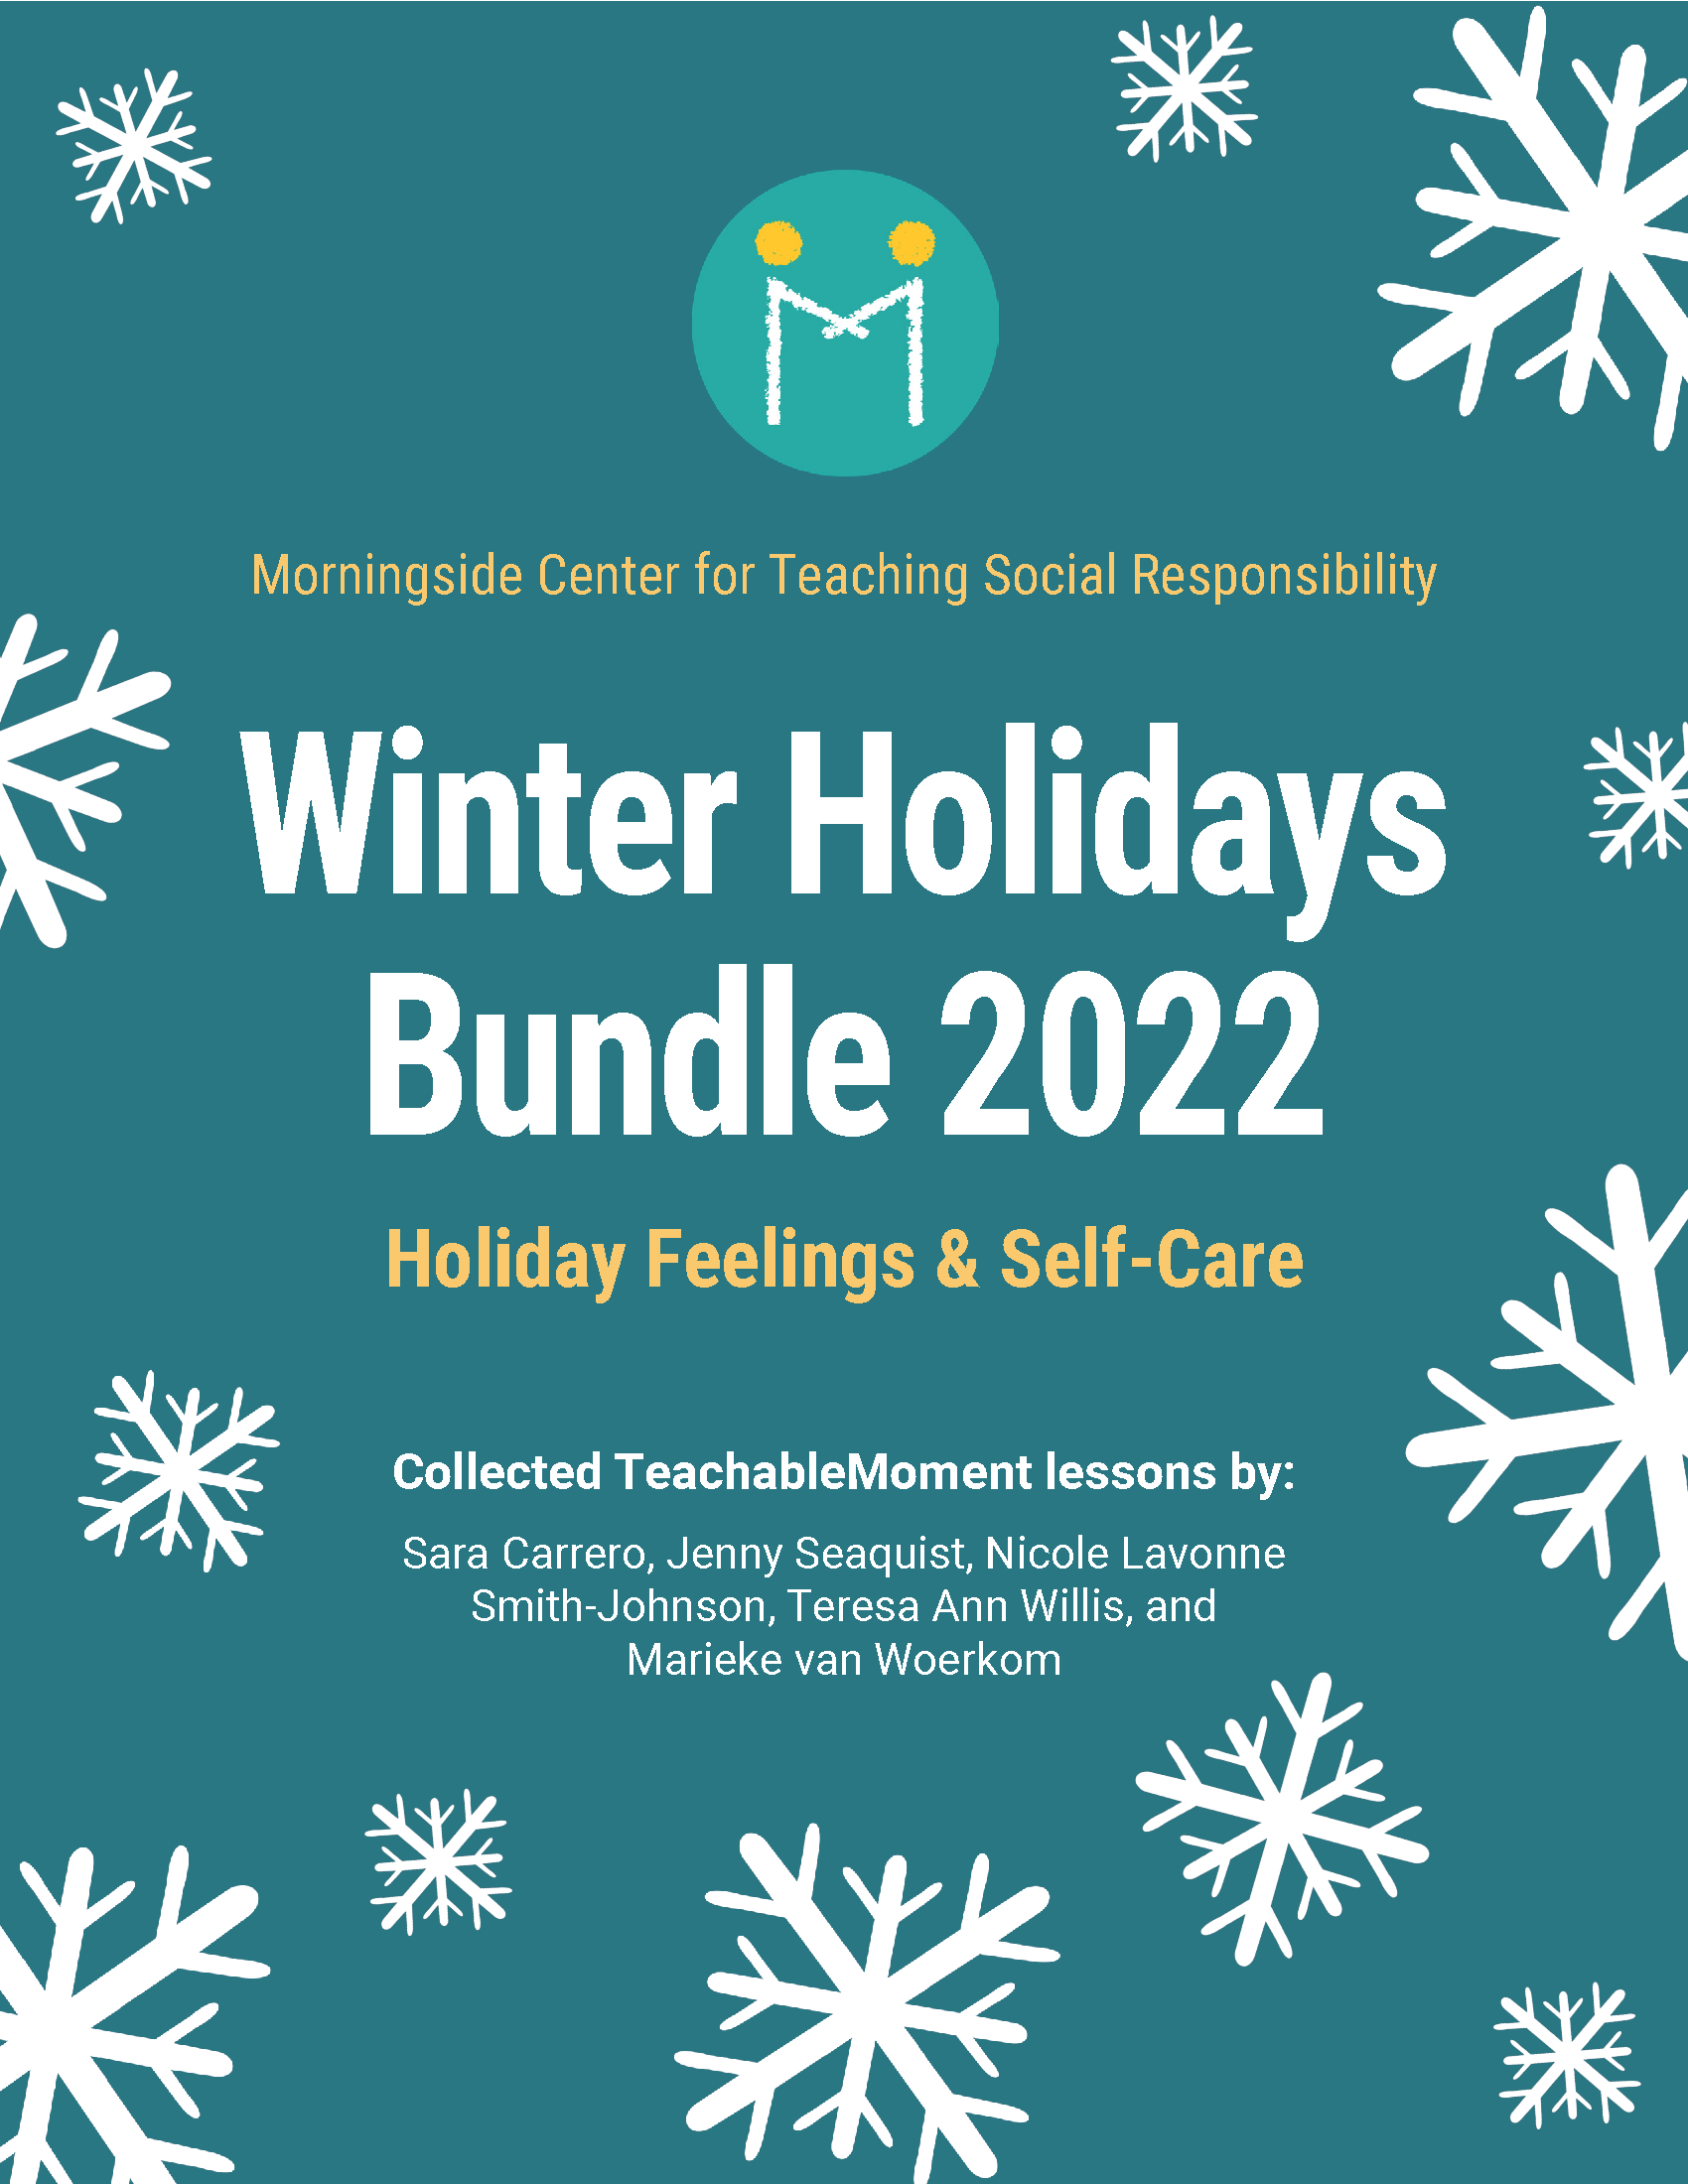 Winter Holidays Bundle cover